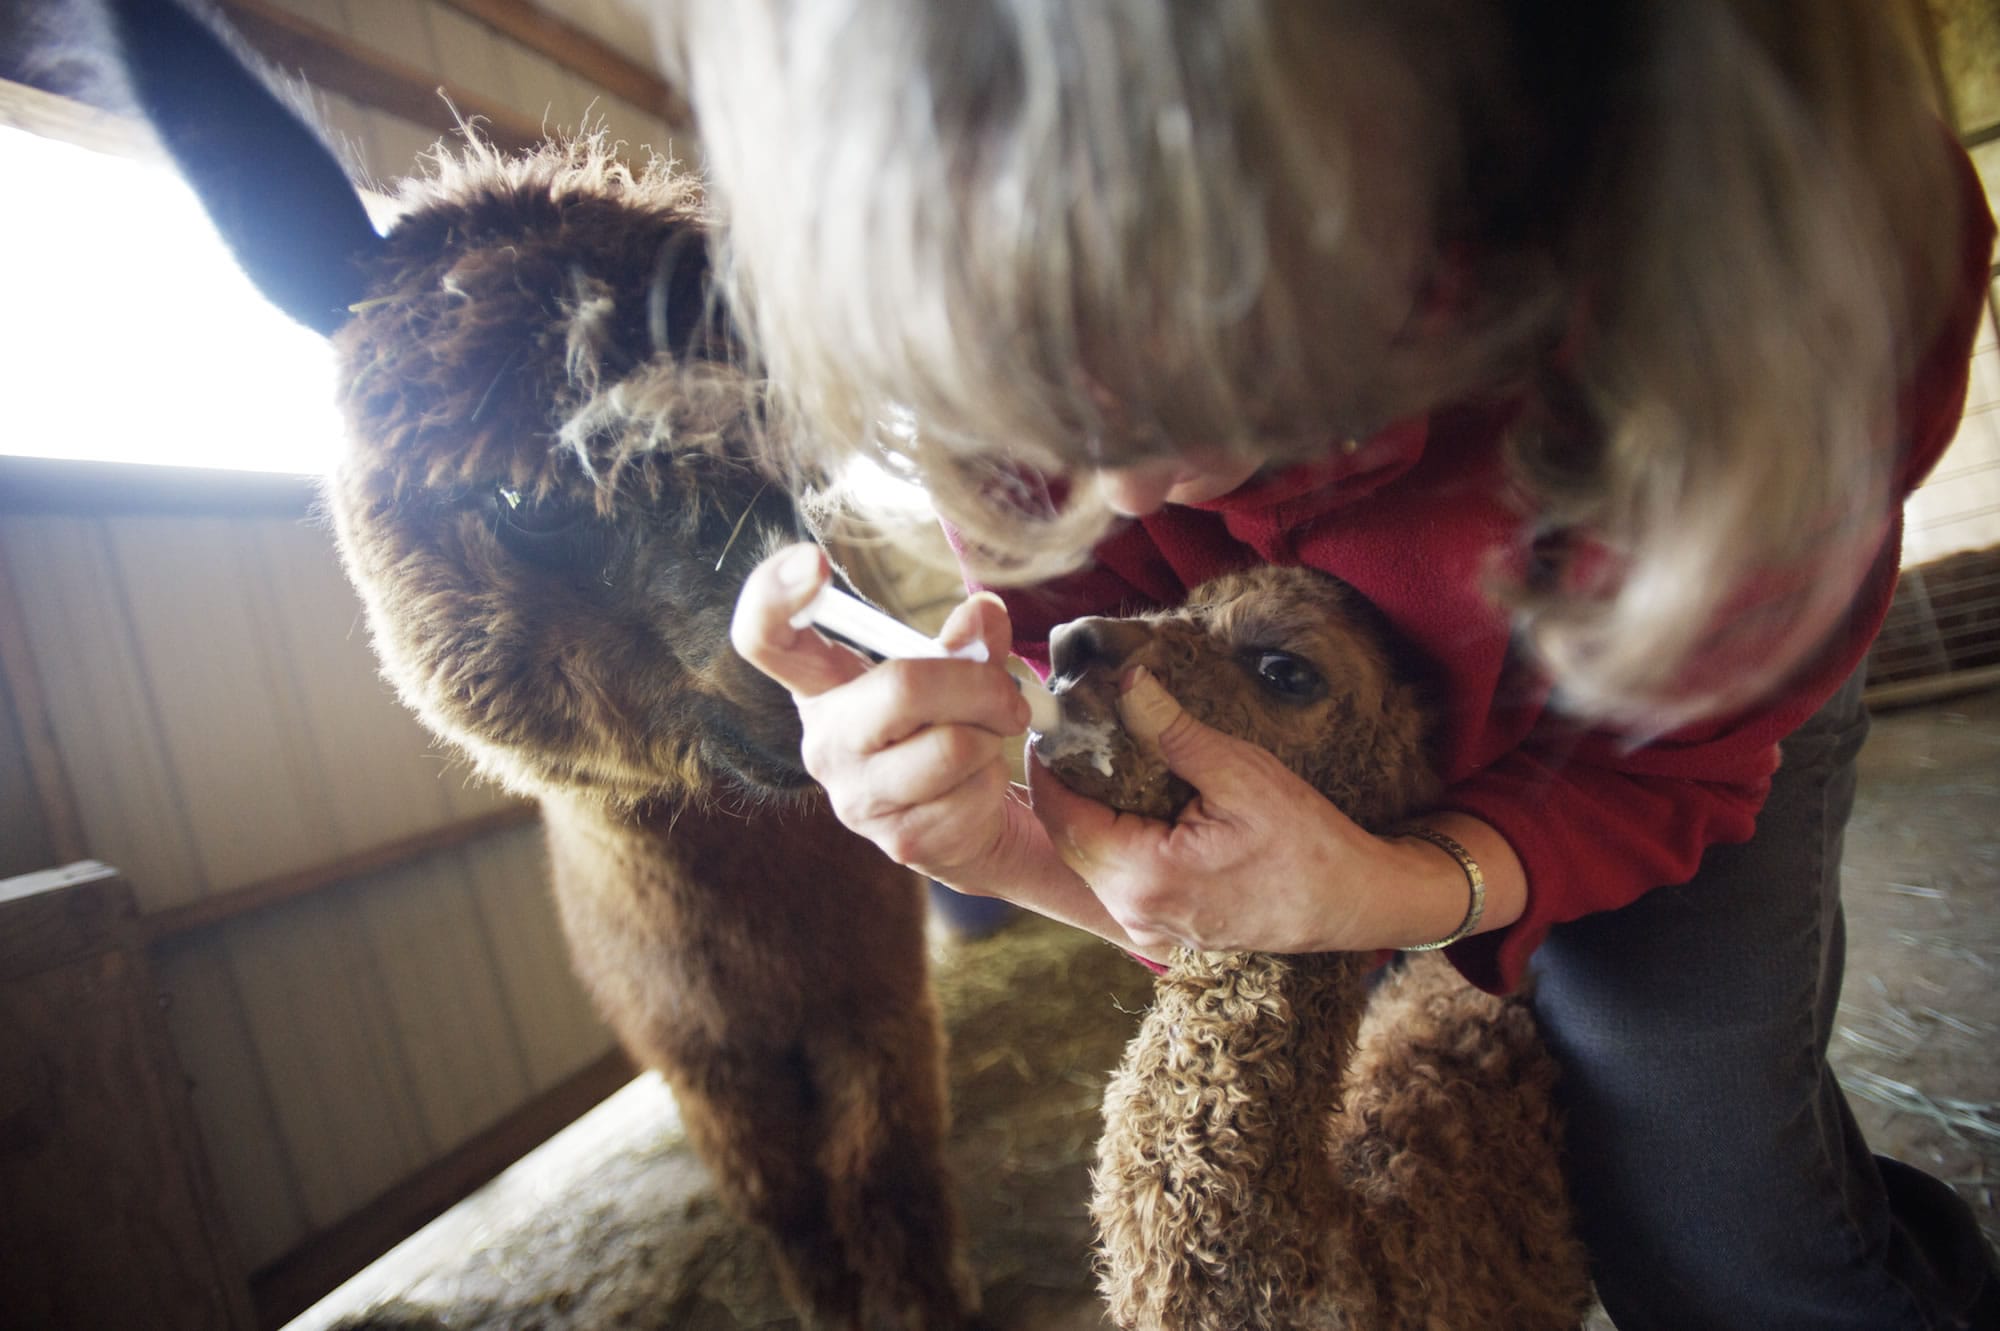 Ruthie Gohl feeds a 6 hour old alpaca at Columbia Mist Alpacas in Woodland.